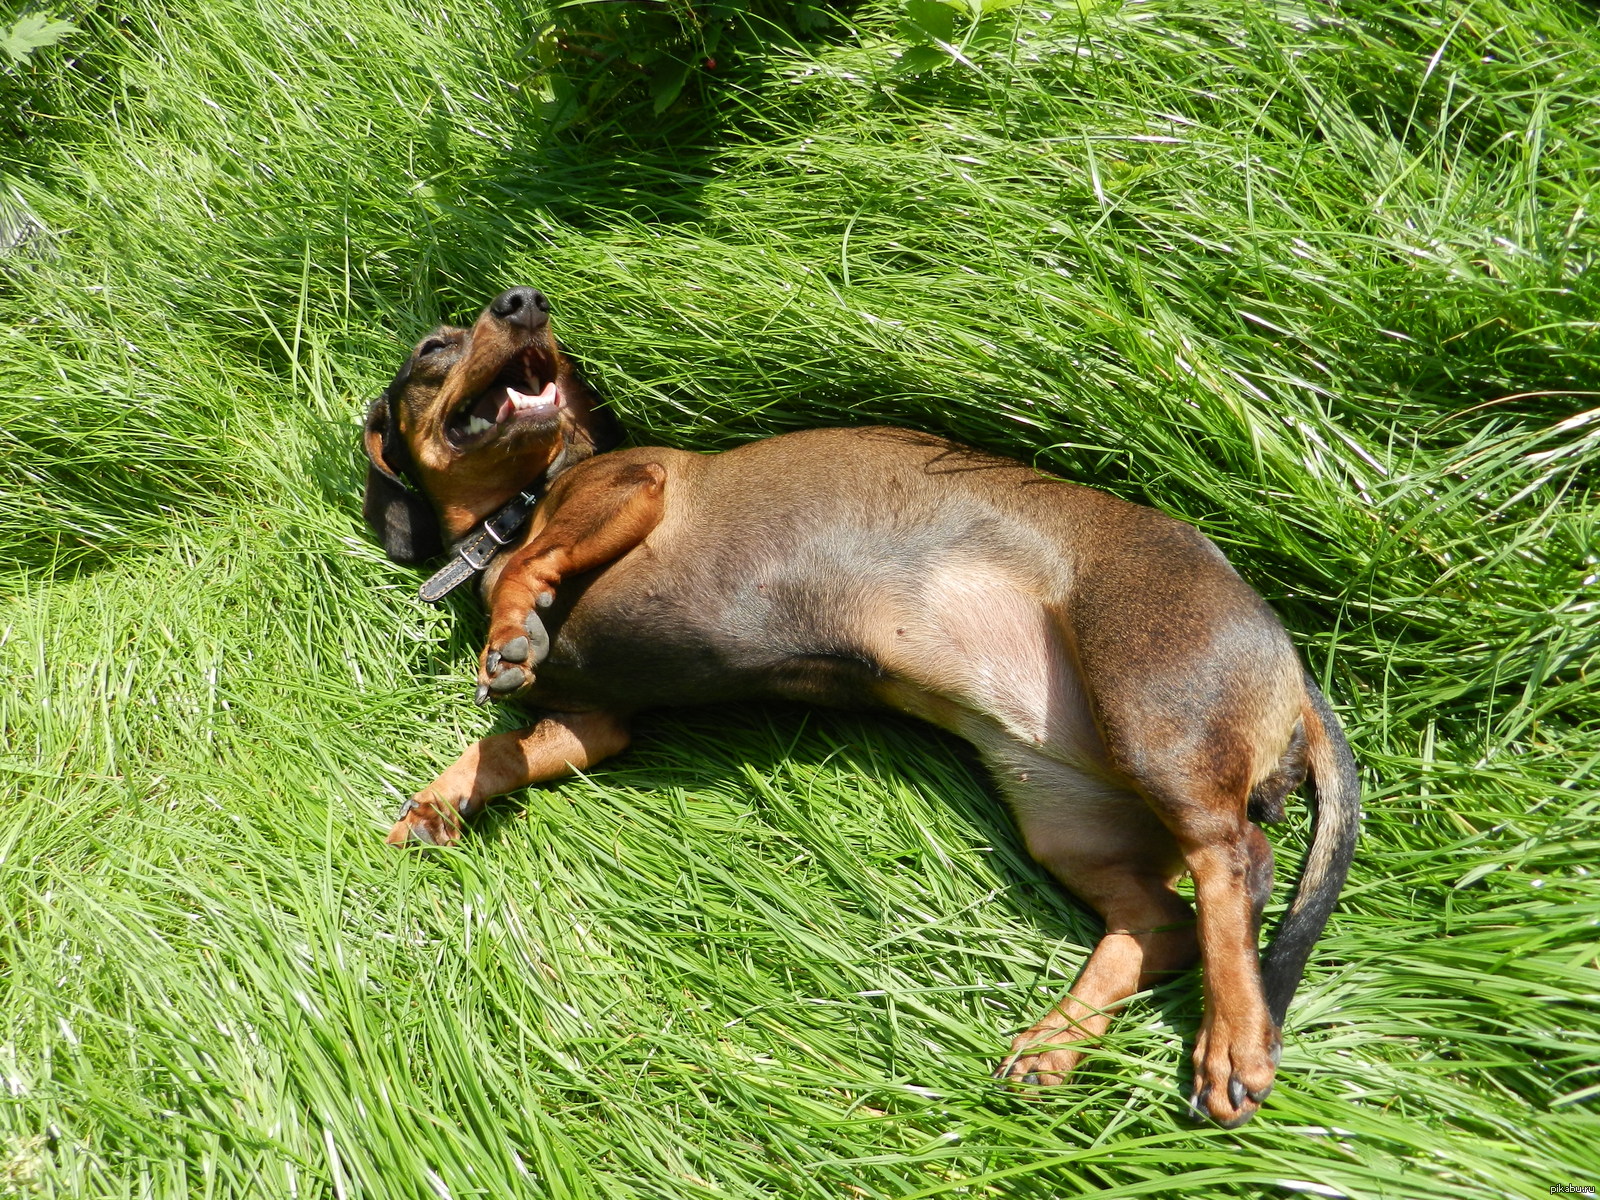 Who lives well in Russia ... my dog-sausage. Have a warm, sunny summer! - Dog, Summer, Wallow, Dacha, Dachshund